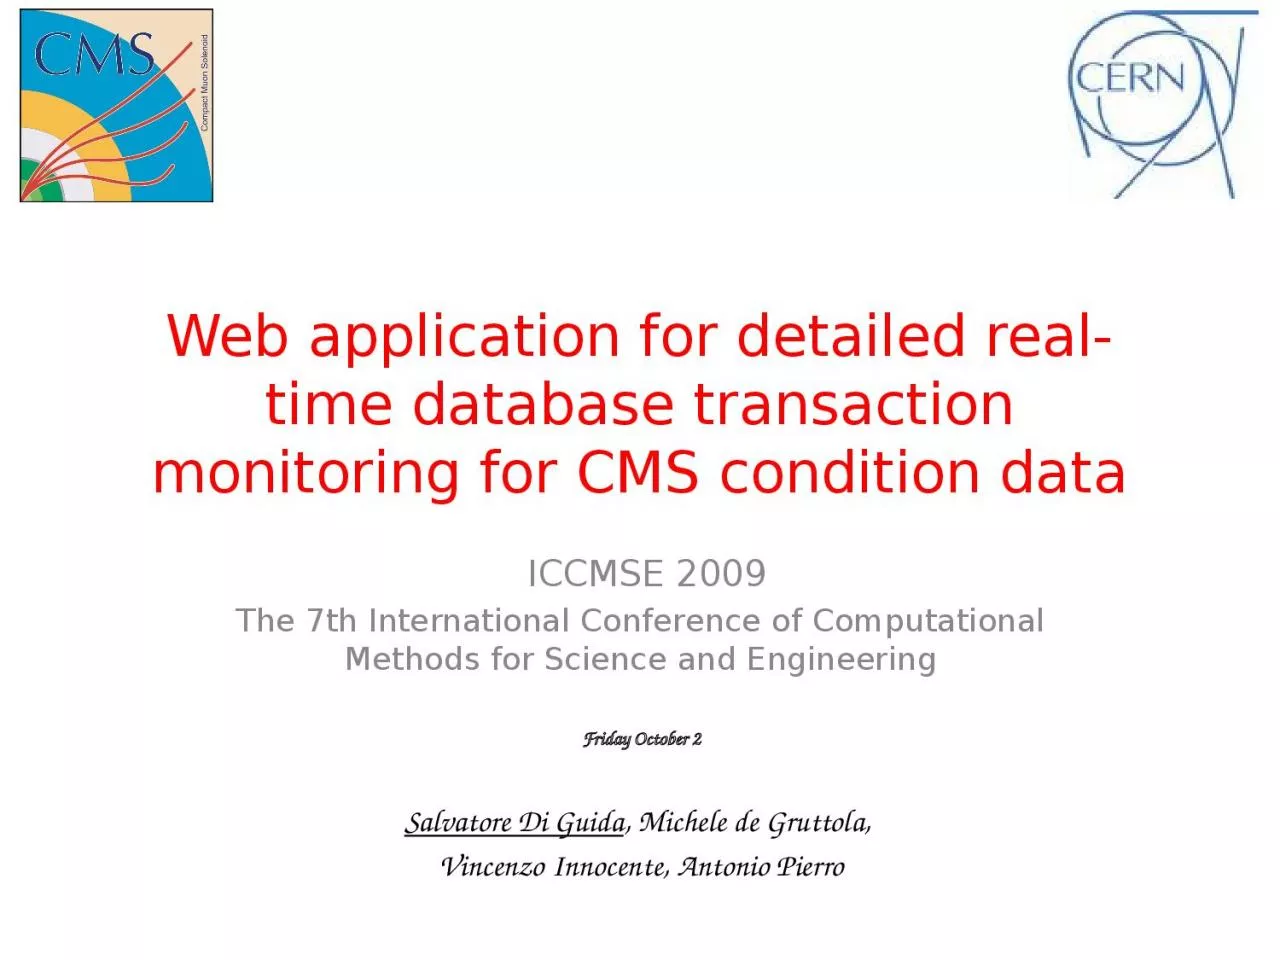 Web application for detailed real-time database transaction monitoring for CMS condition